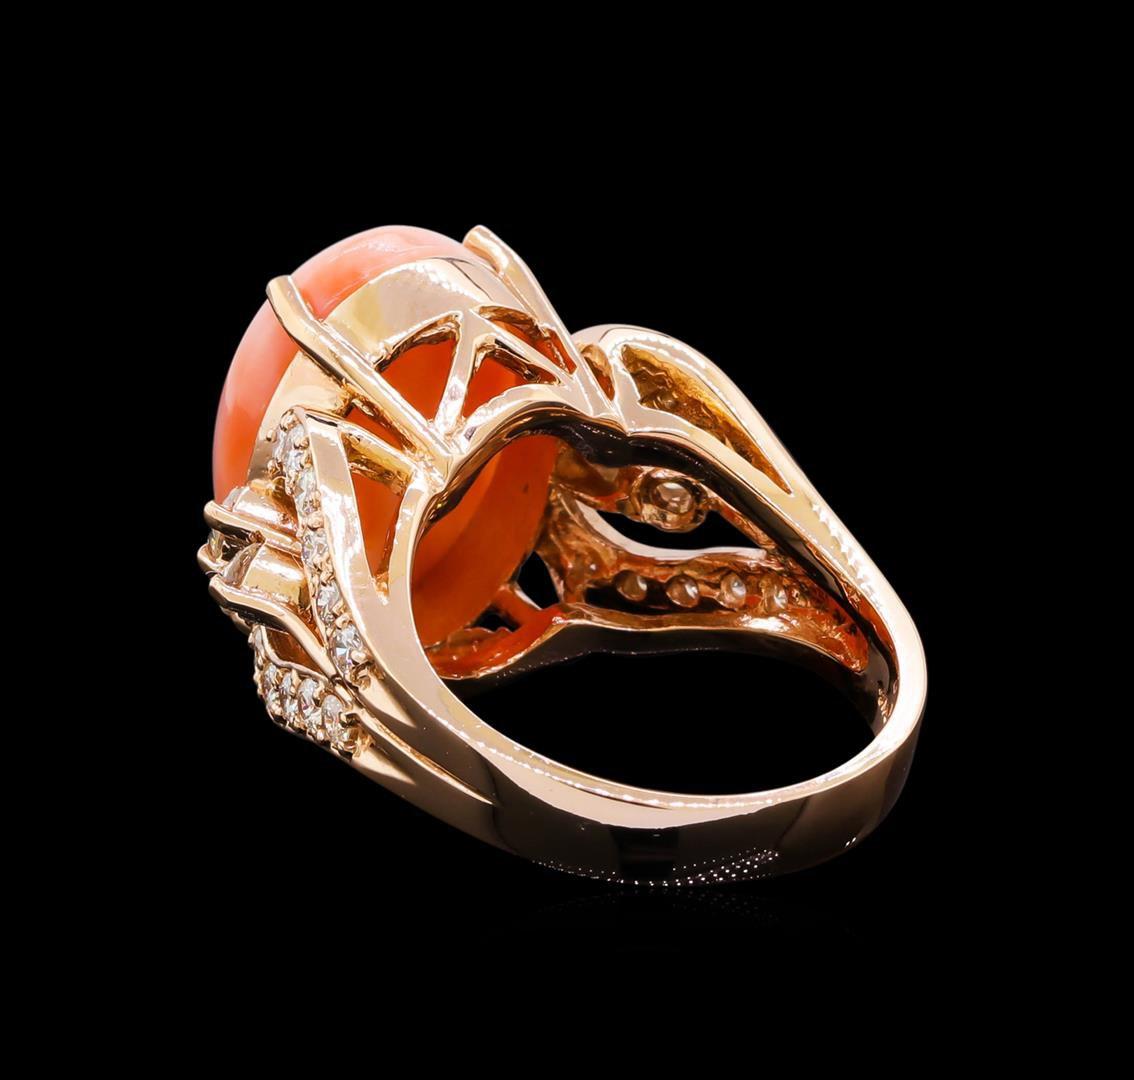 5.68 ctw Pink Coral and Diamond Ring - 14KT Rose Gold